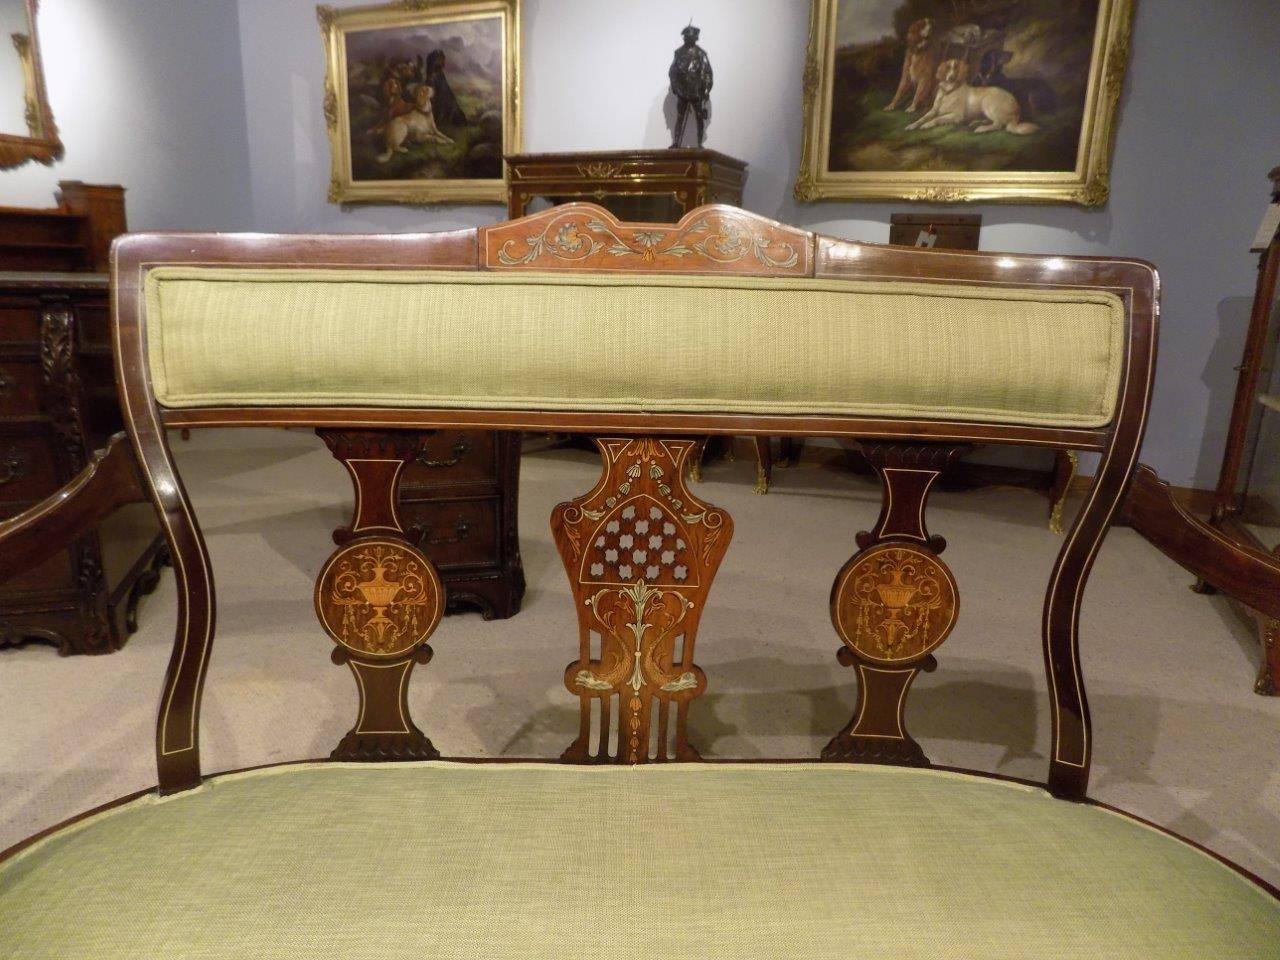 A fine quality mahogany inlaid Edwardian period settee. Having a shaped back with a padded support and a central pierced fretwork and marquetry panel, flanked by two supports with marquetry inlaid detail. The padded seat newly re-upholstered in a